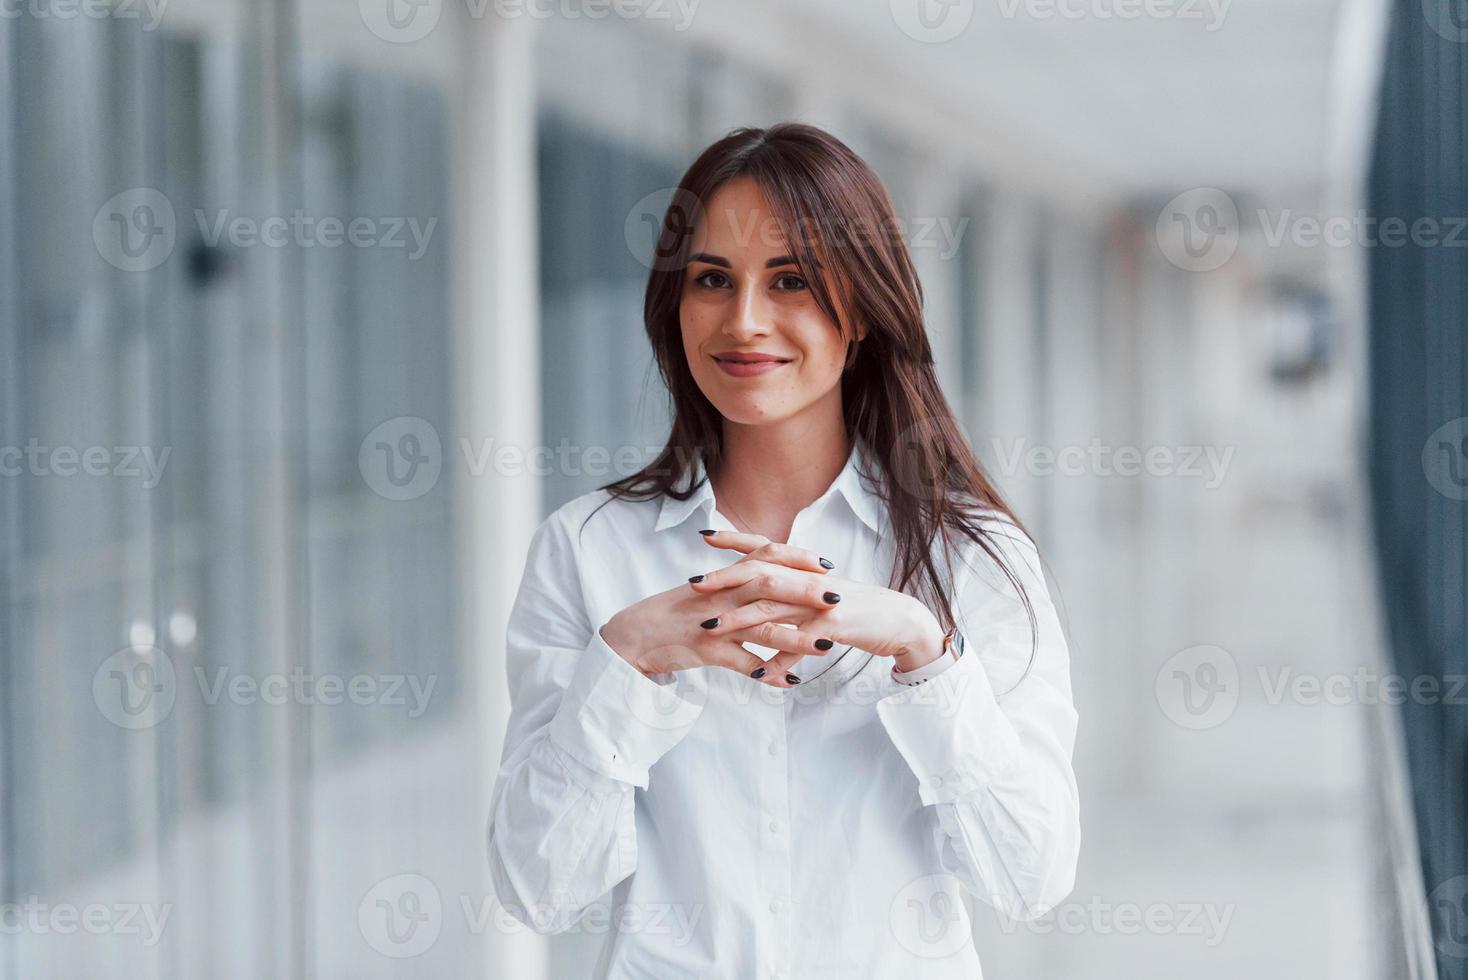 Brunette in white shirt that walks indoors in modern airport or hallway at daytime photo